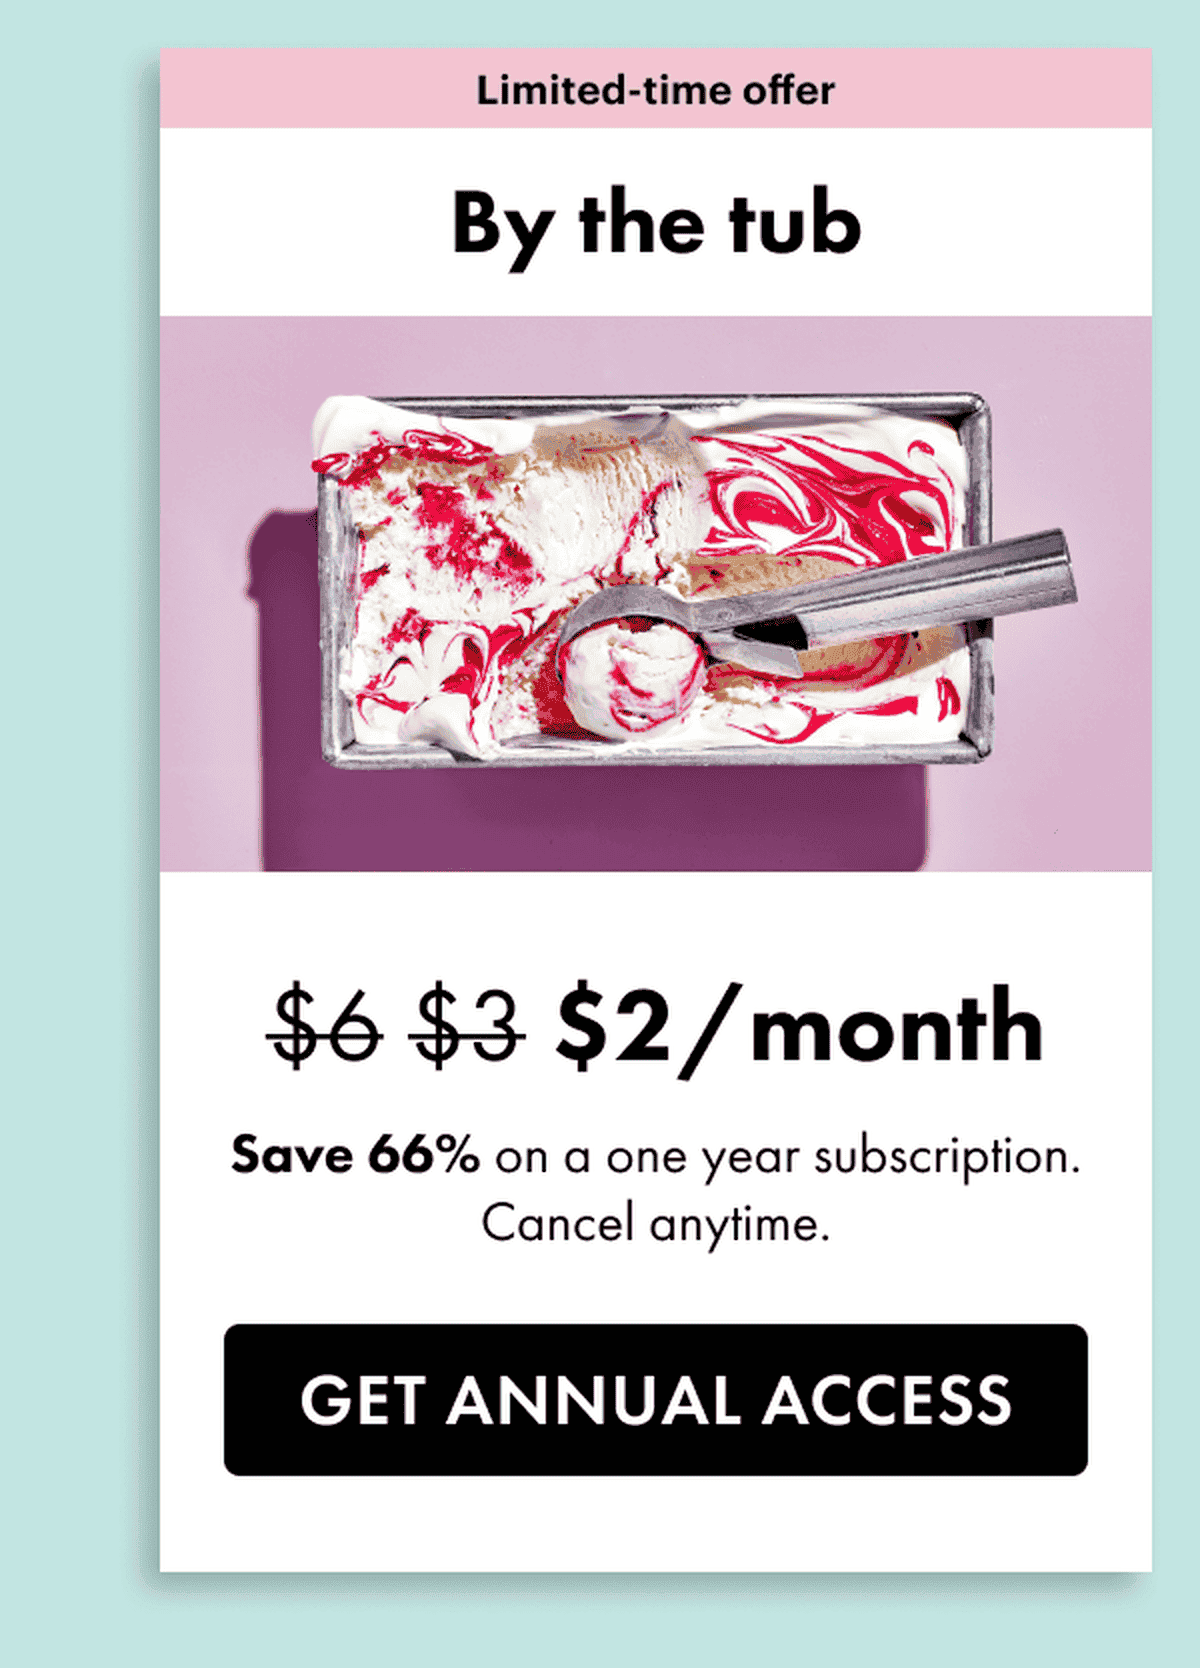 Limited time offer. By the tub. \\$2 a month. Save 66% on a one year subscription. Cancel anytime. Get annual access.